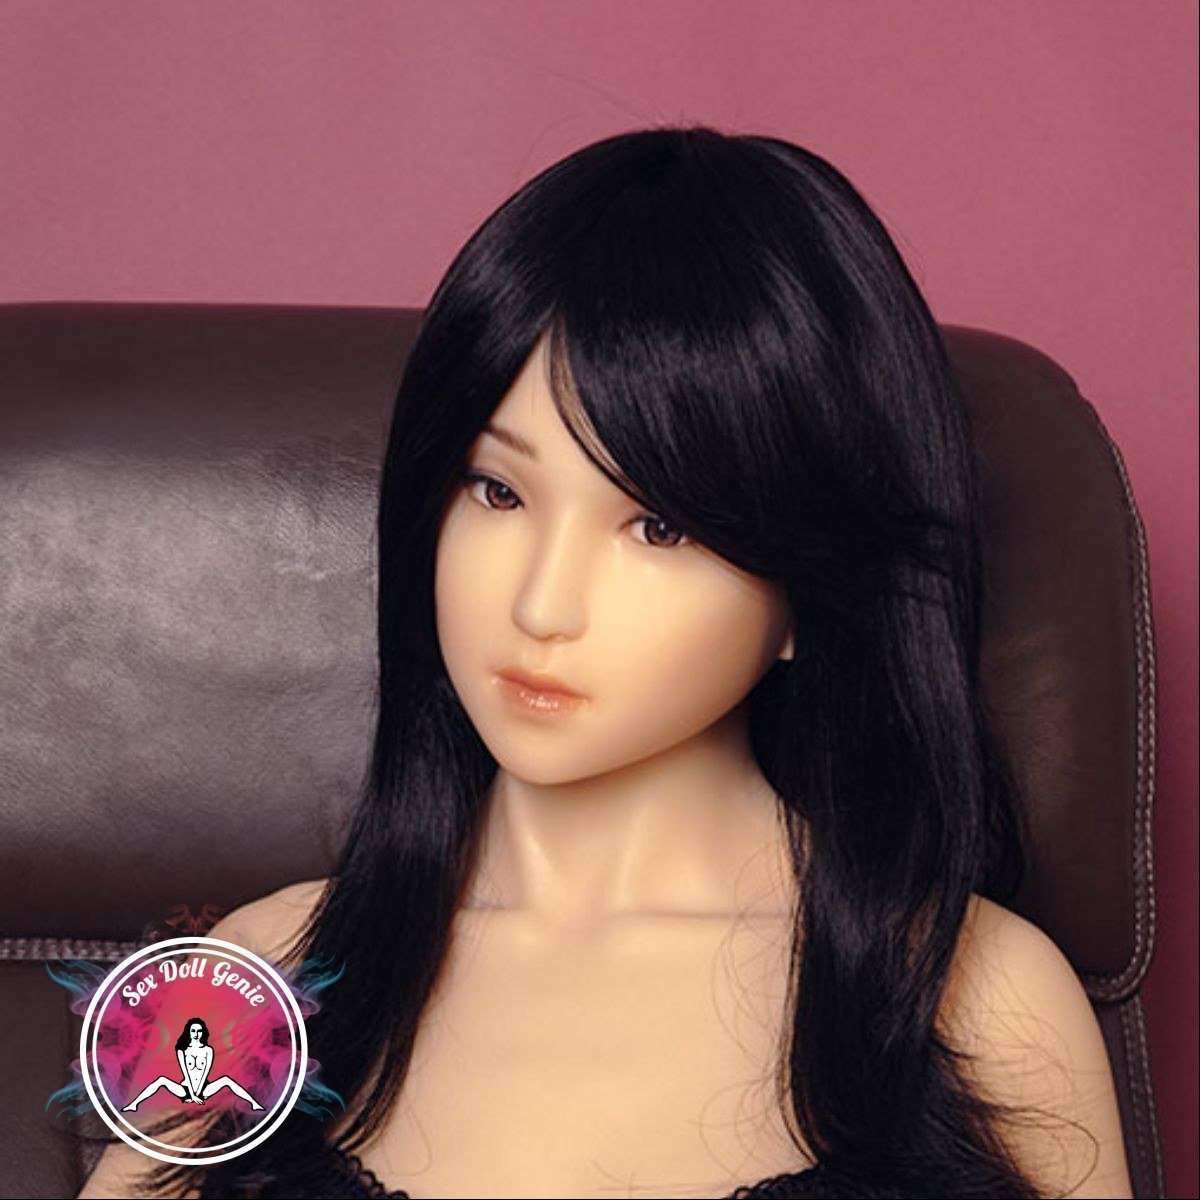 DS Doll - 163 - Emily Head - Type 1 D Cup Silicone Doll-4